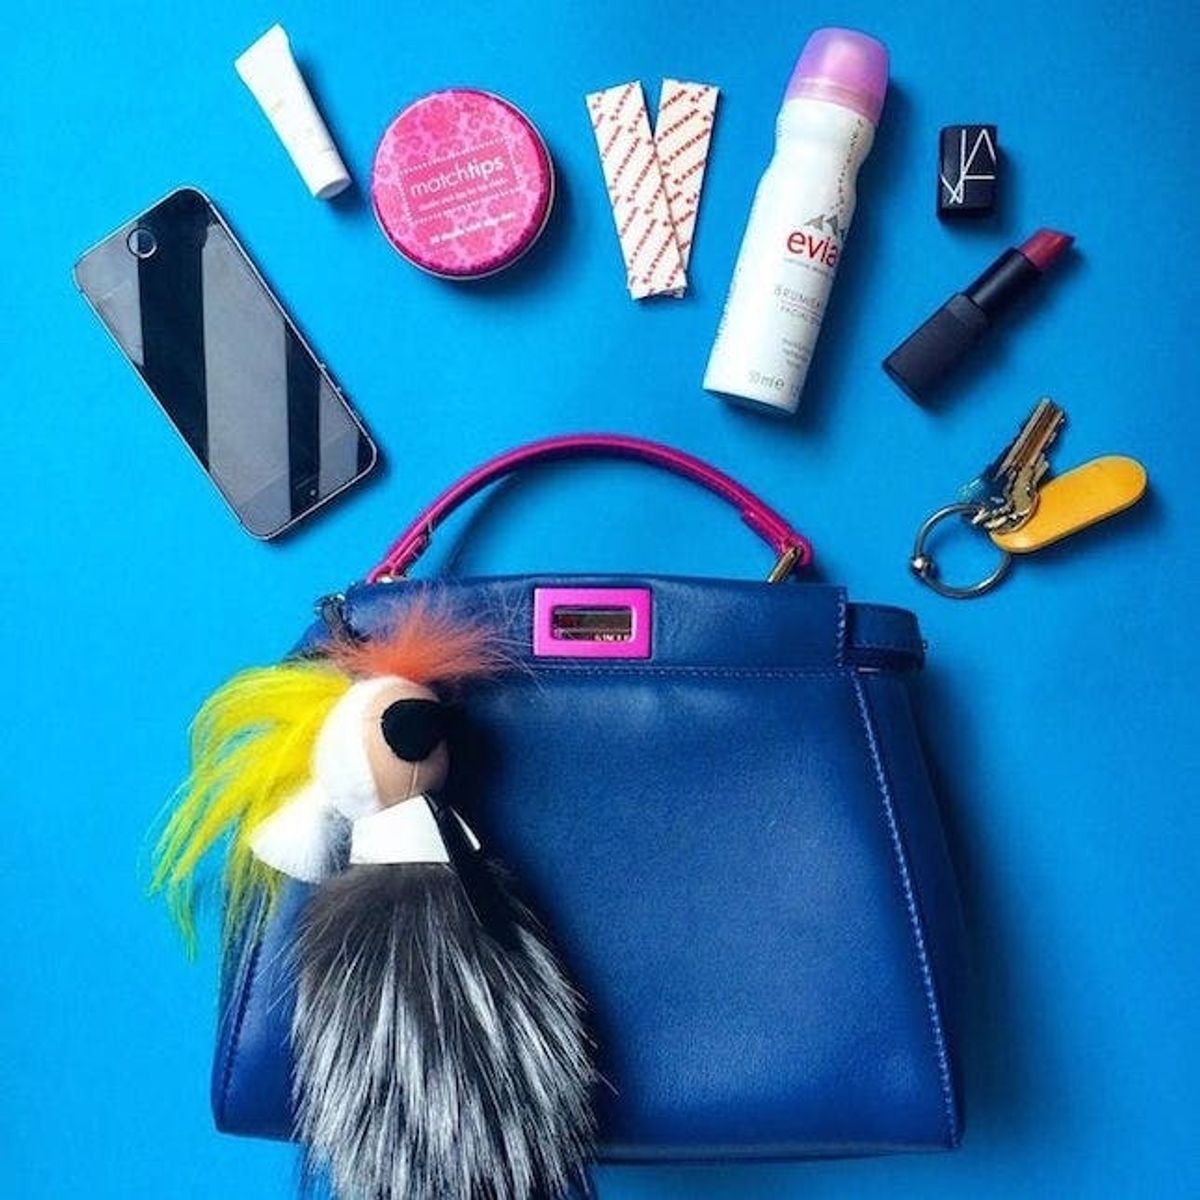 See the #WhatsInYourBag Pics from 17 Style Bloggers